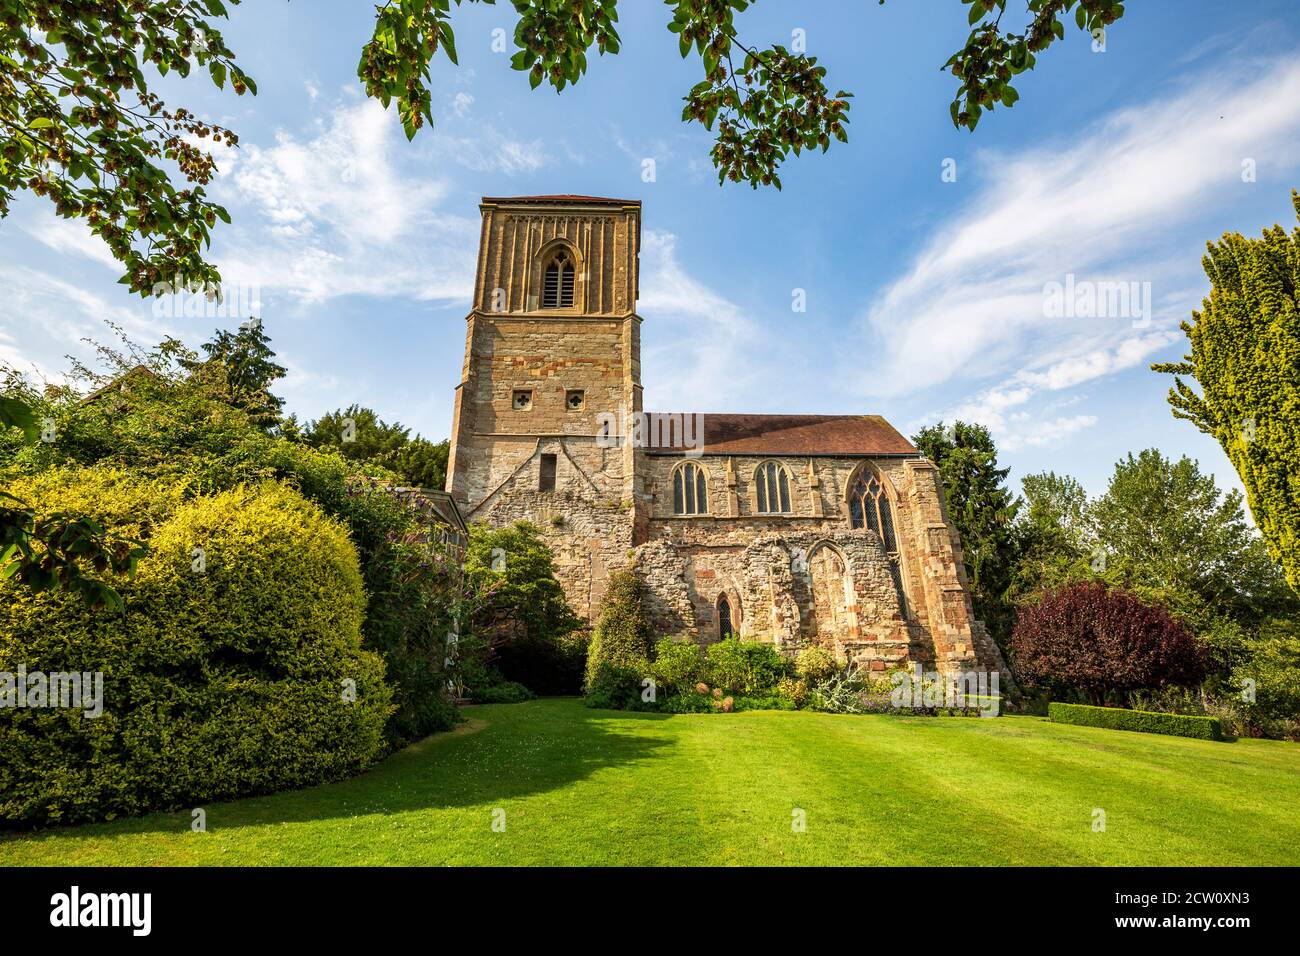 The 12th-century Little Malvern Priory in the Malvern Hills, Worcestershire, England Stock Photo